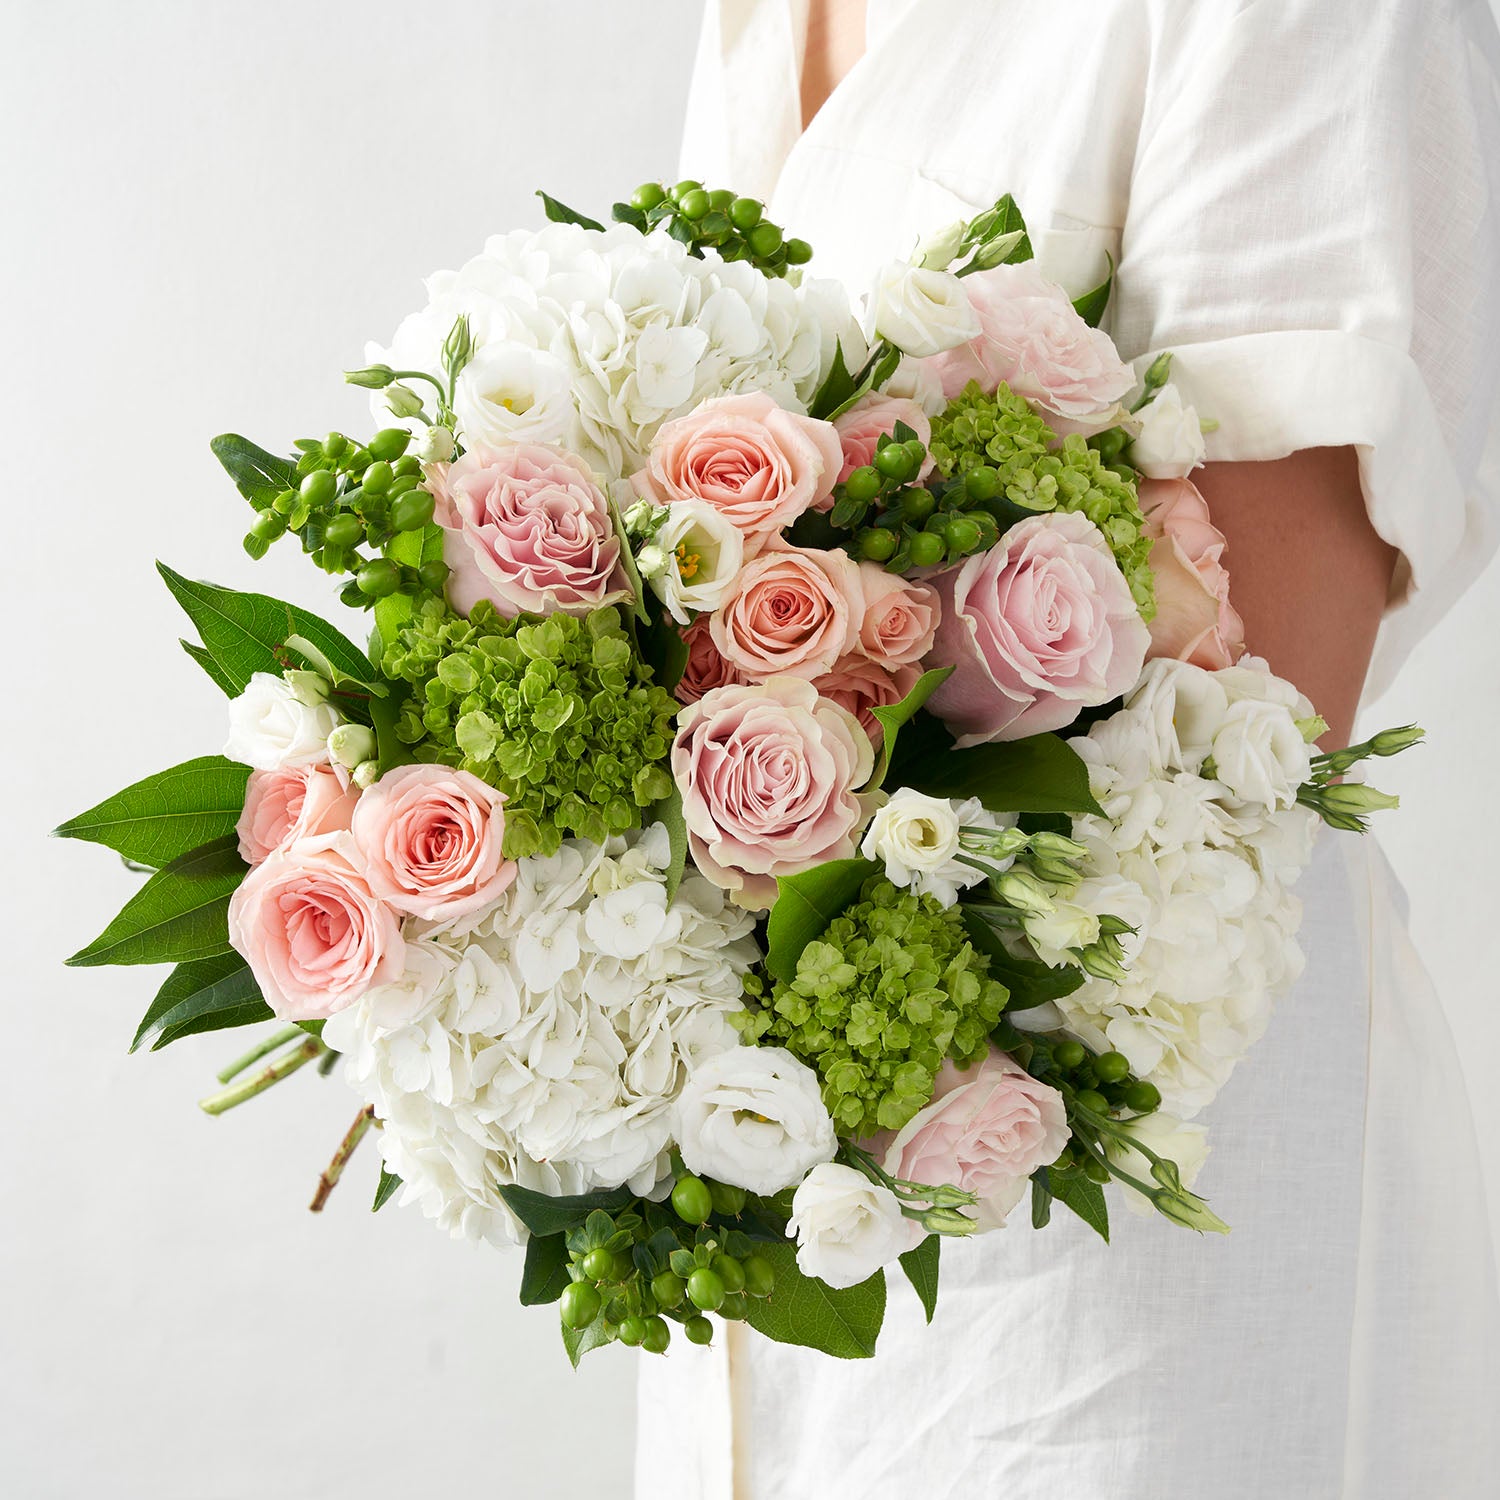 Woman in white dress holding round white,green, and soft pink, hand tied bouquet.